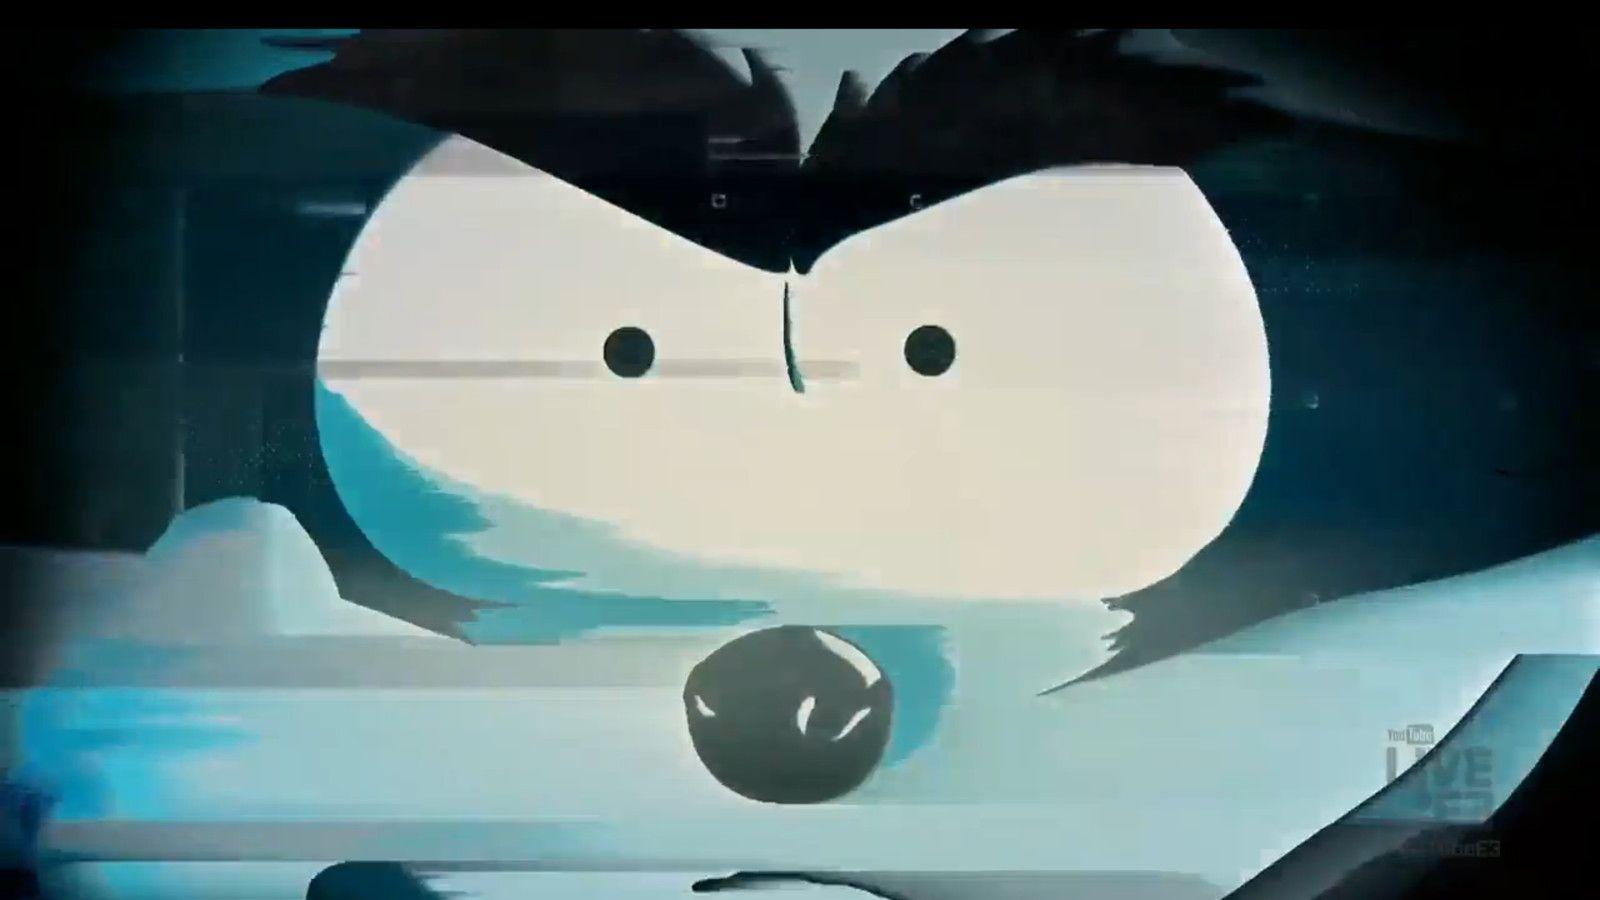 South Park: The Fractured But Whole trailer